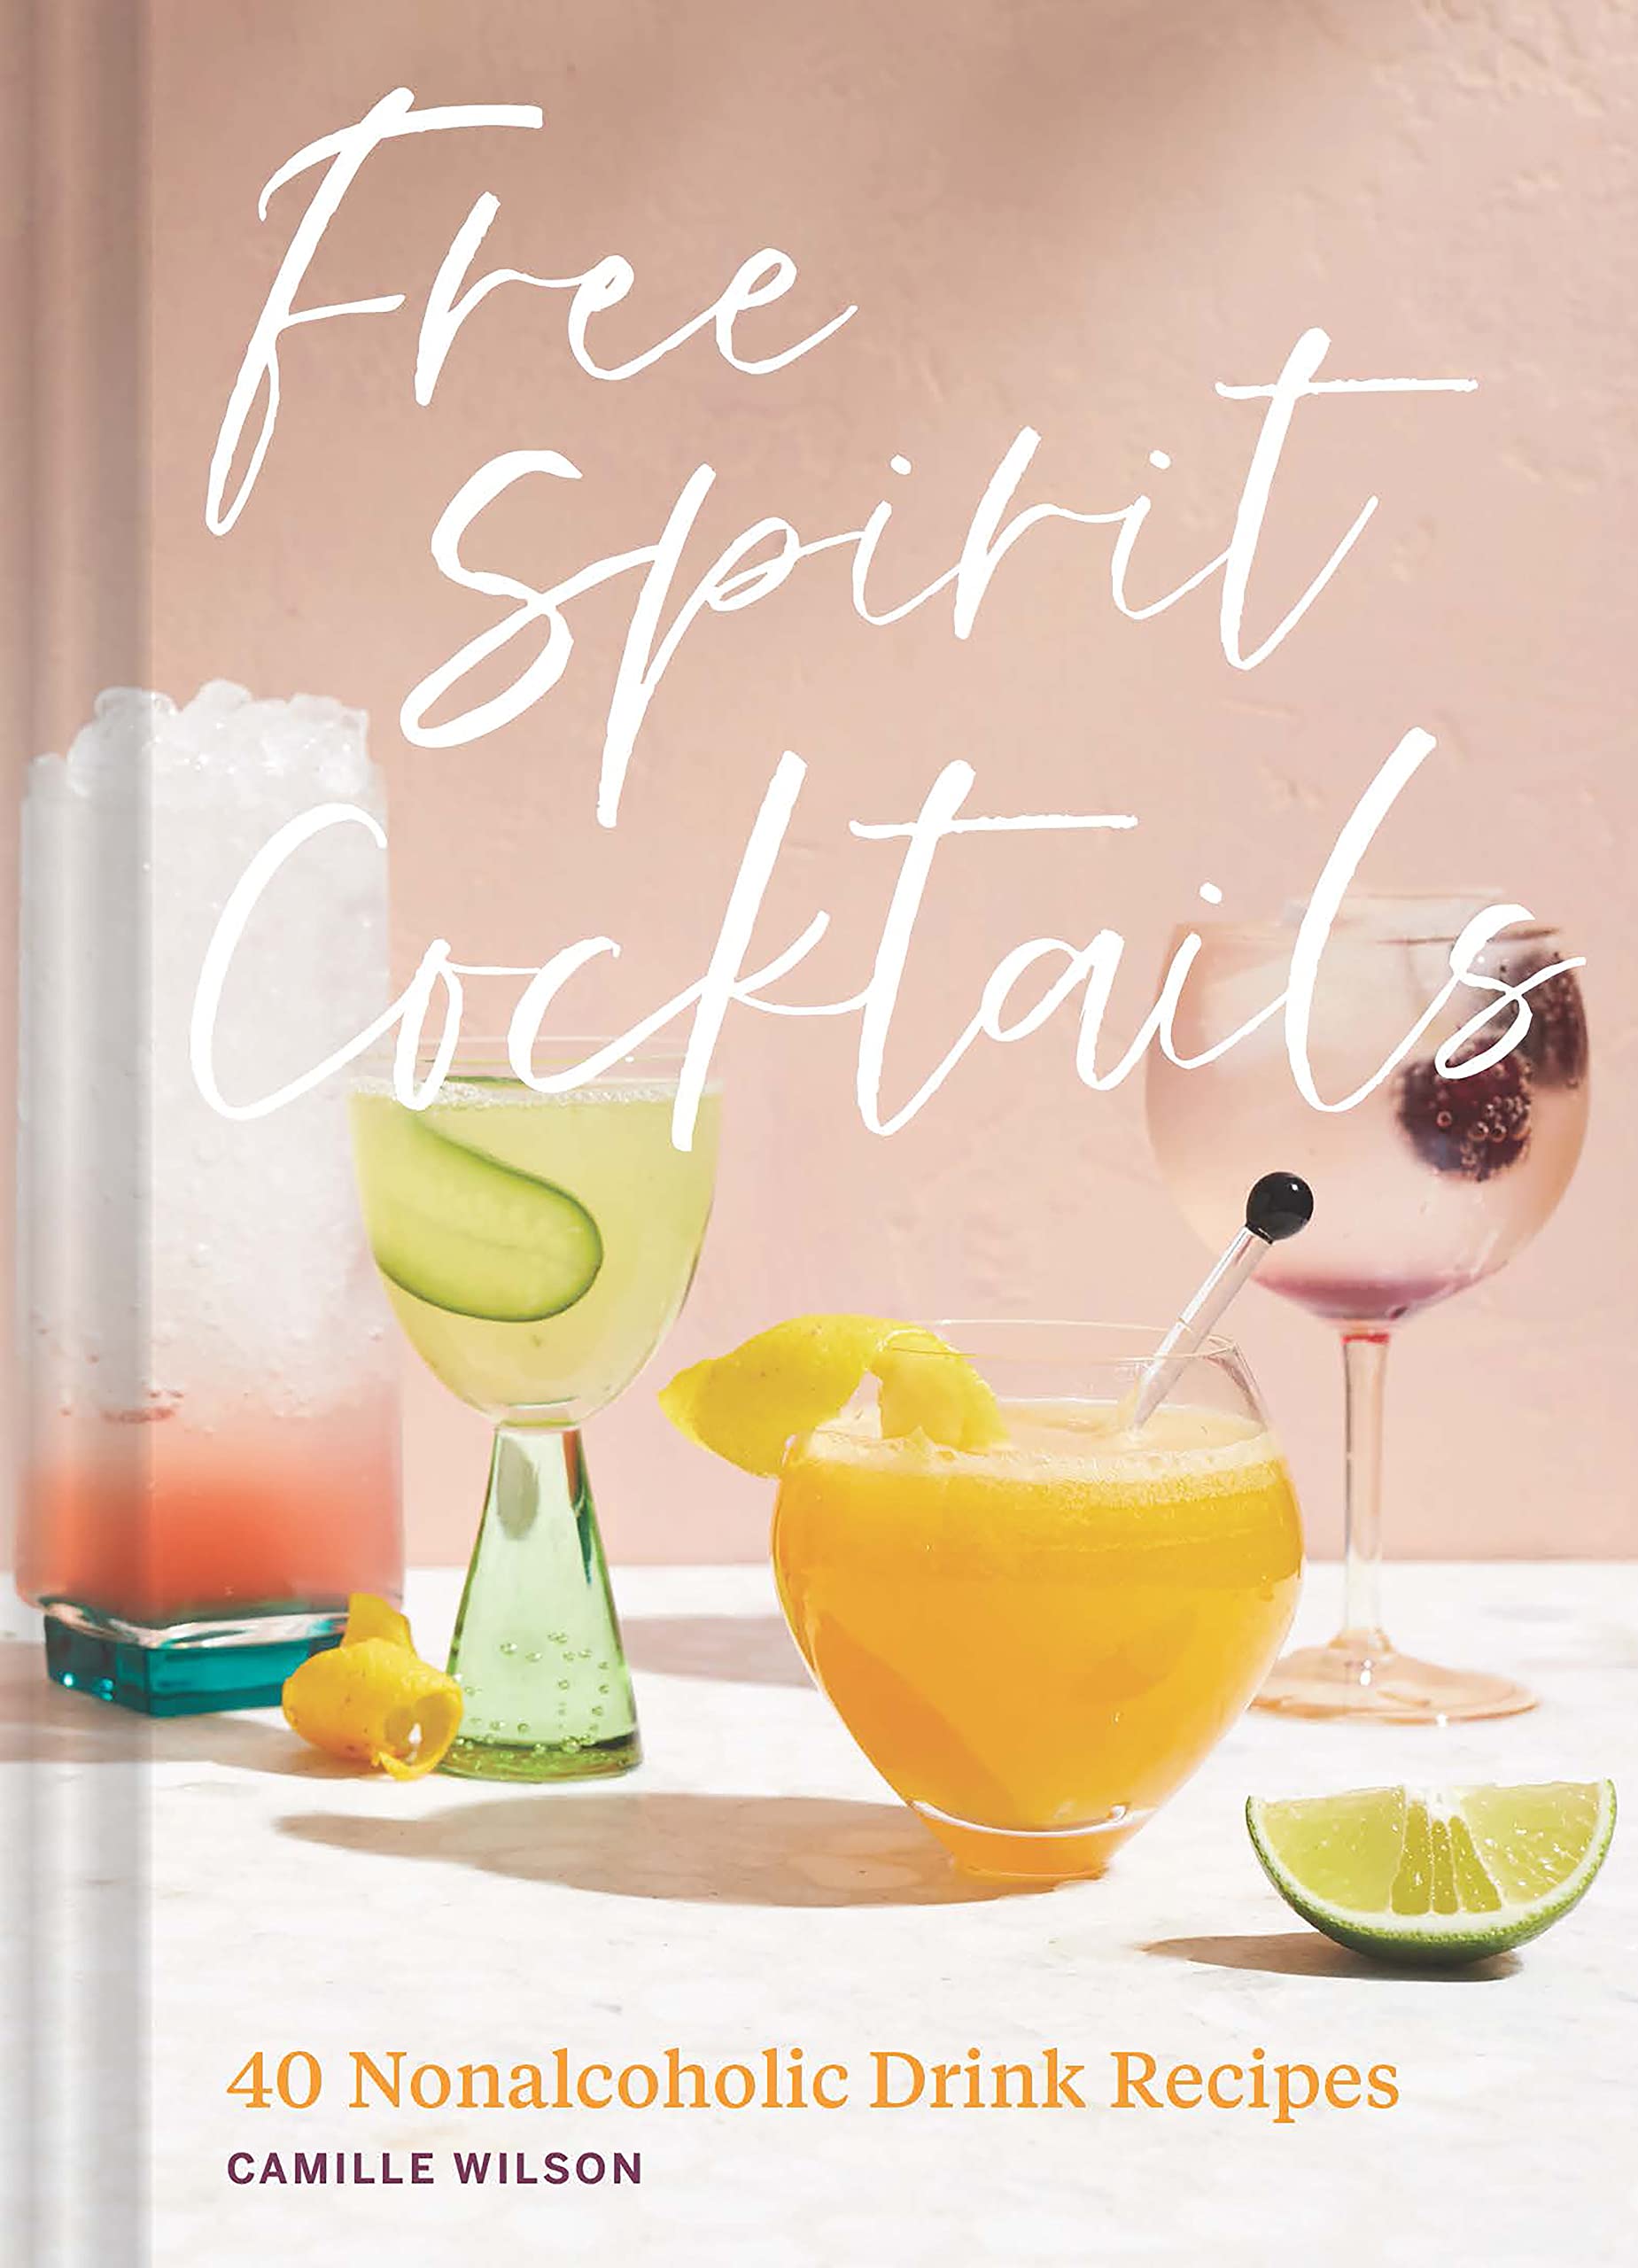 Free Spirit Cocktails: 40 Nonalcoholic Drink Recipes (Camille Wilson)